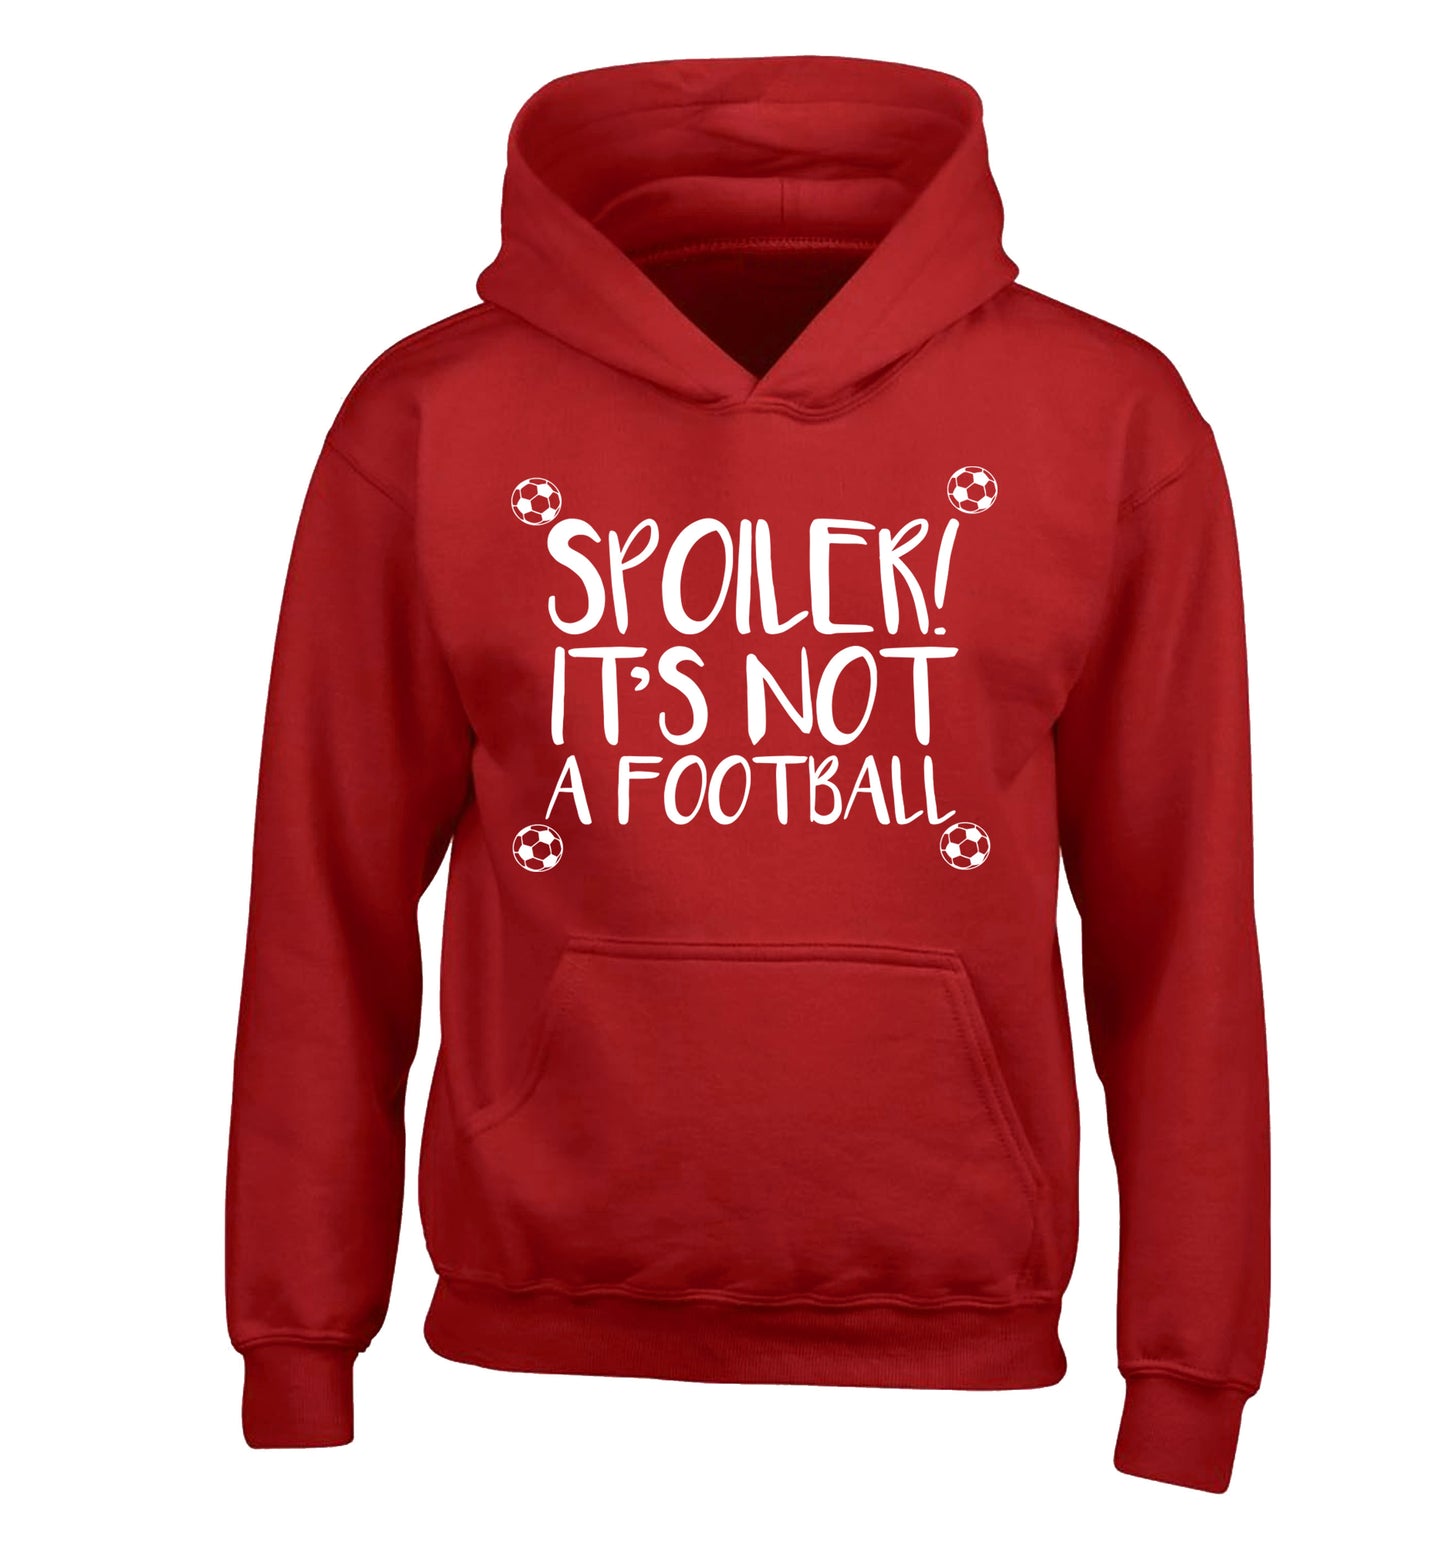 Spoiler it's not a football children's red hoodie 12-13 Years